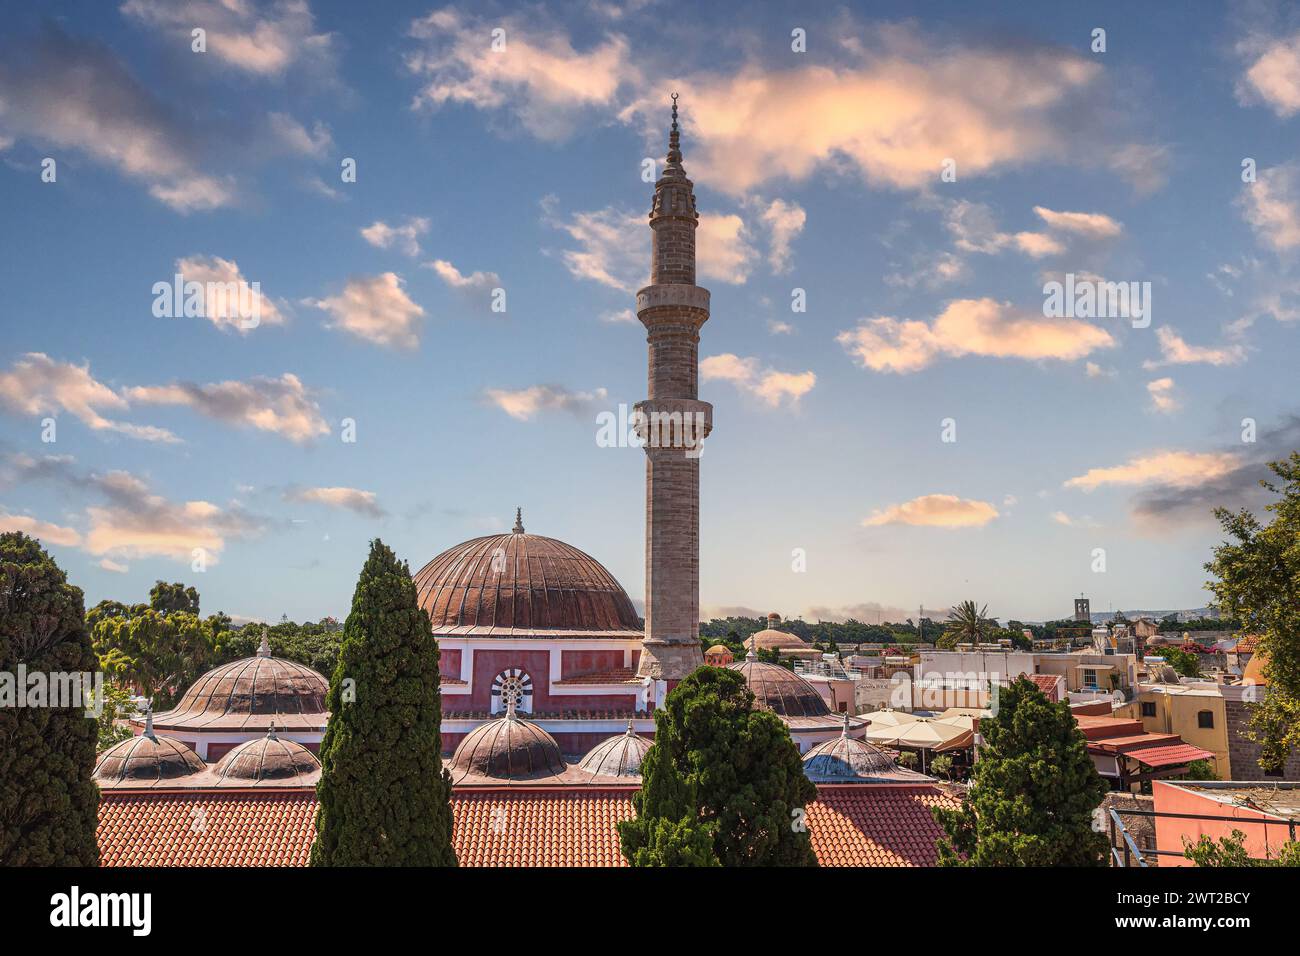 Aerial view of the Suleymaniye Mosque or the Mosque of Suleiman, a former mosque in the old city of Rhodes, Greece. It was originally built after the Stock Photo